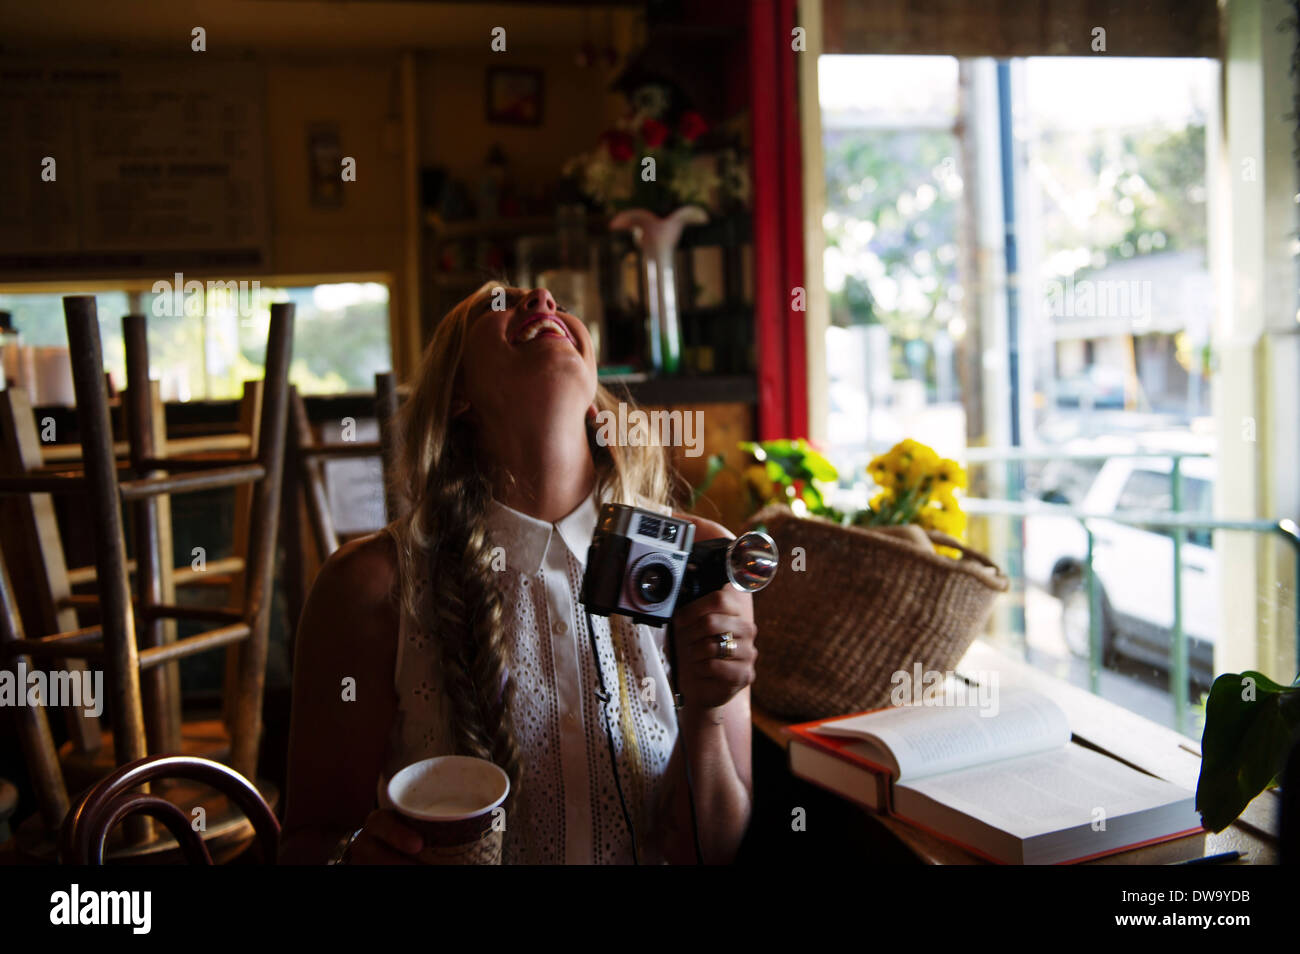 Young woman with camera in cafe Stock Photo